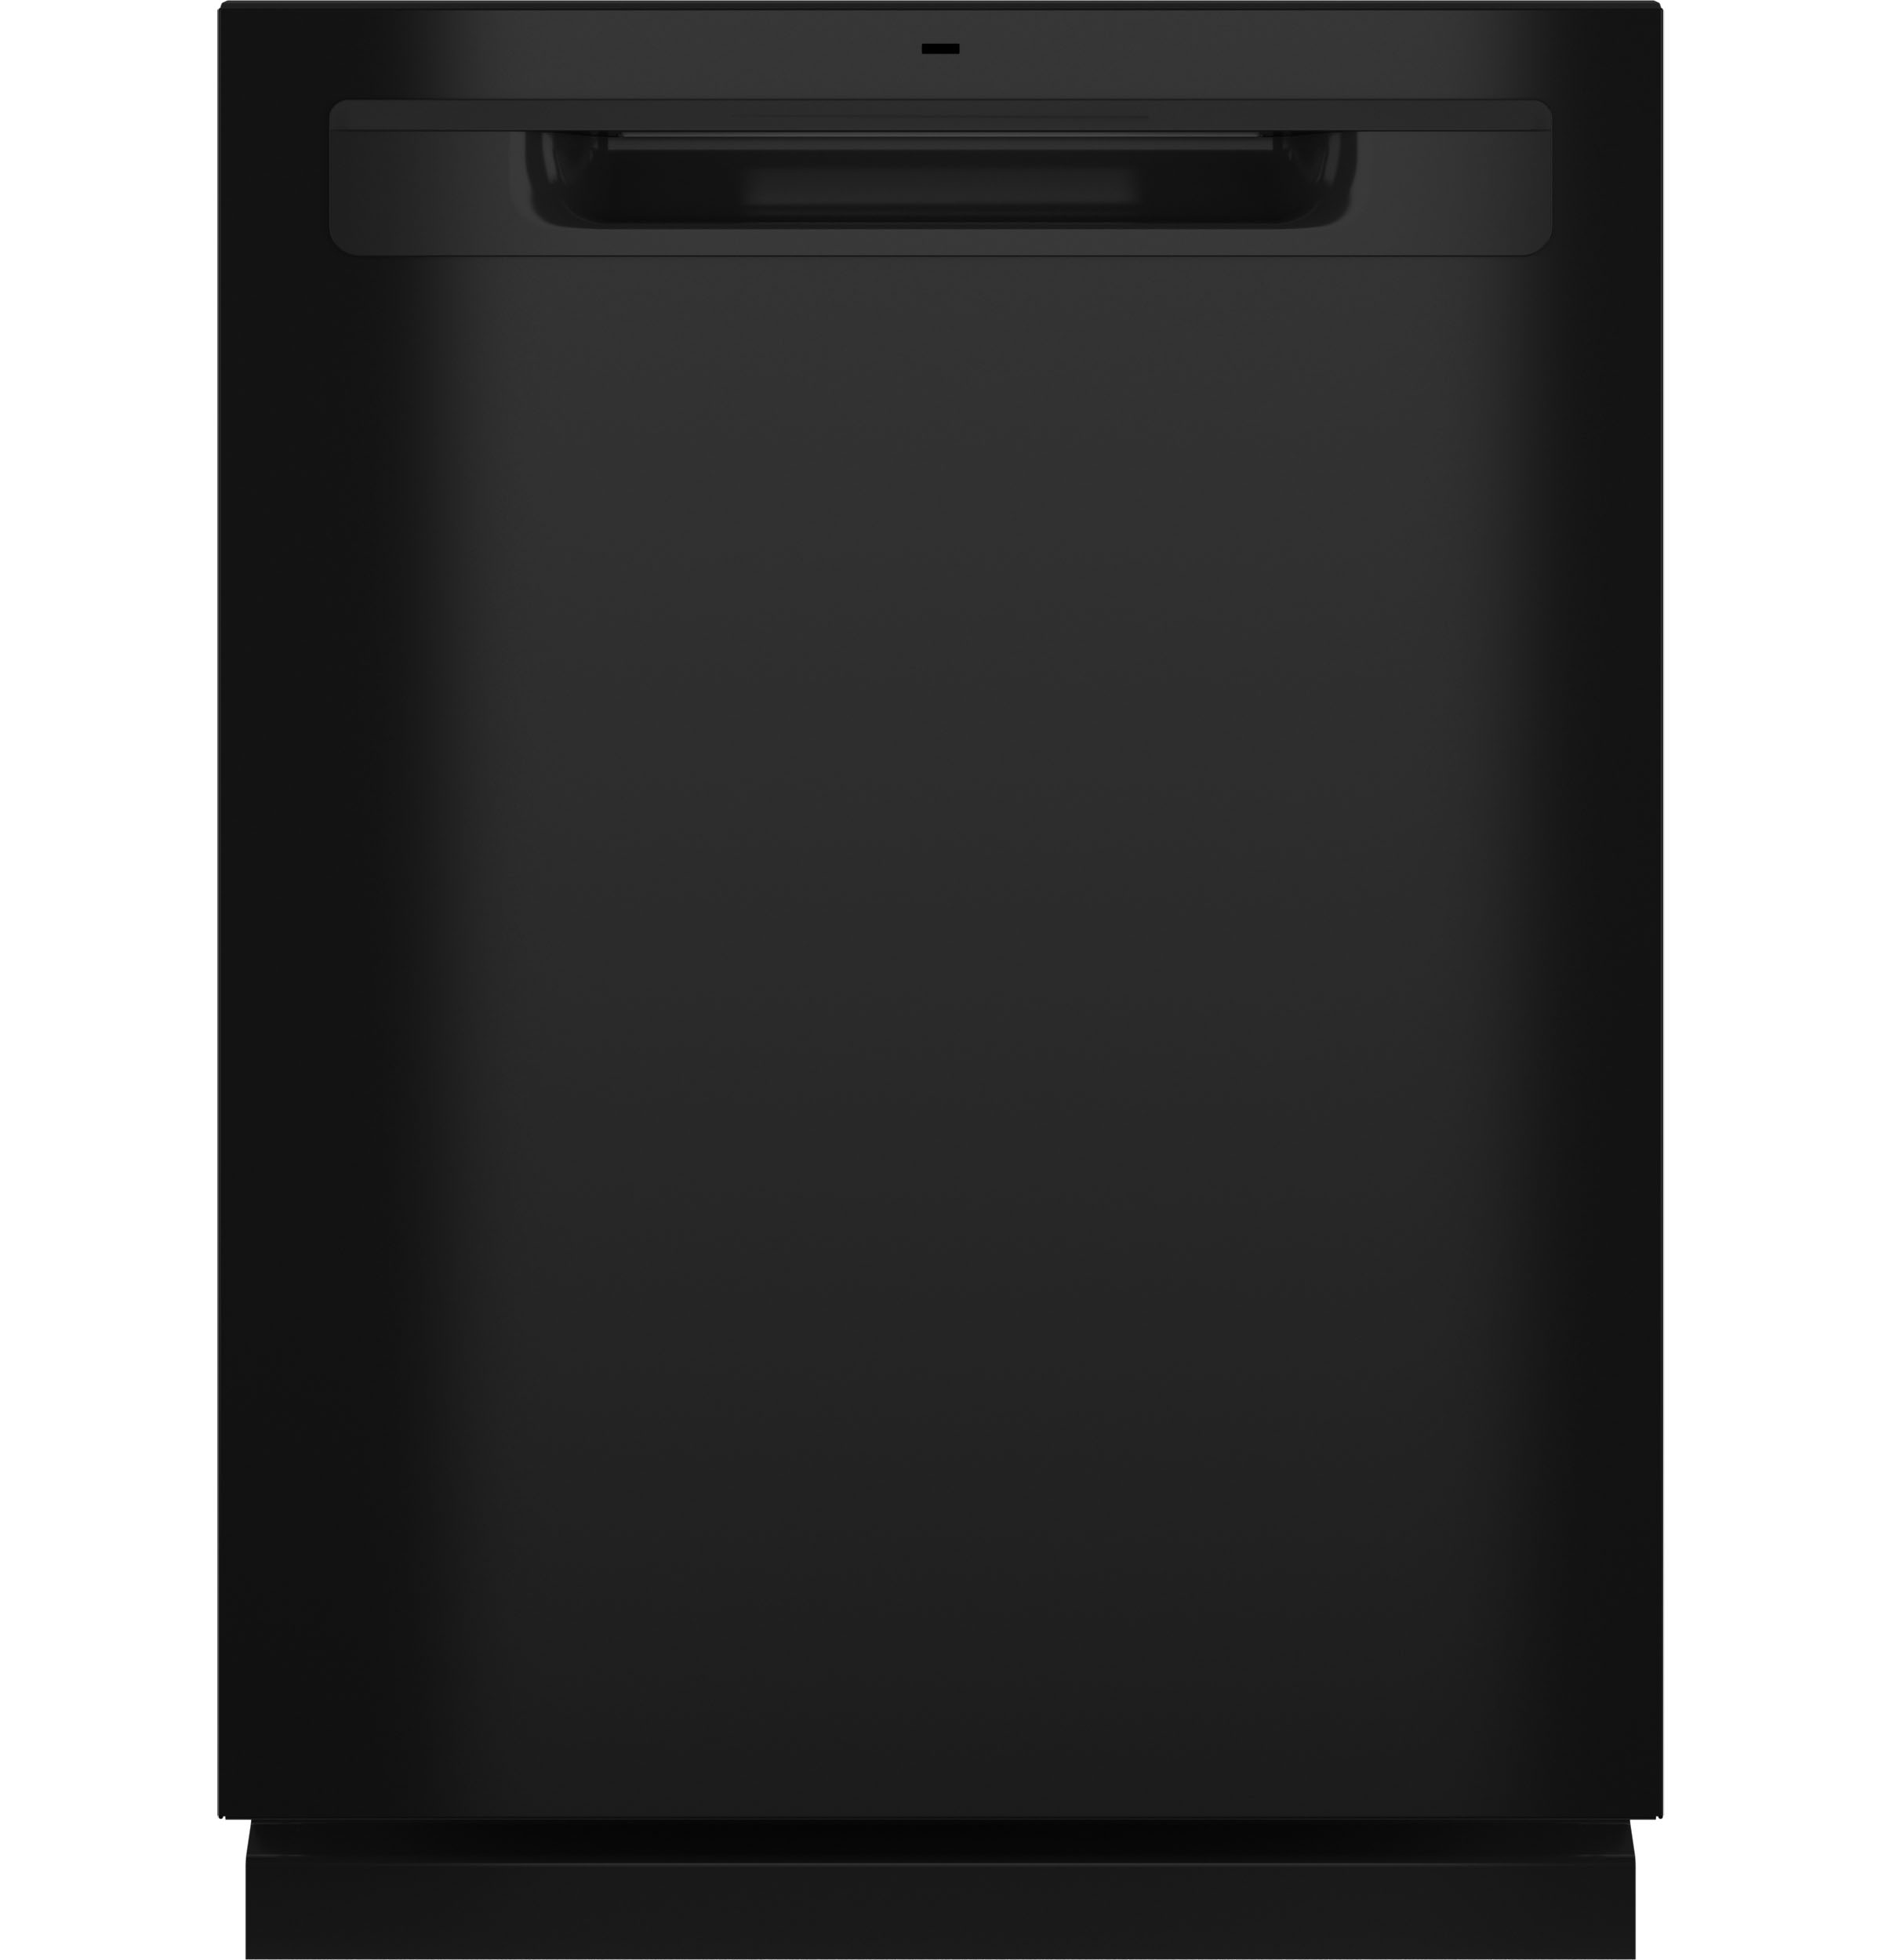 GE® ENERGY STAR® Top Control with Plastic Interior Dishwasher with Sanitize Cycle & Dry Boost